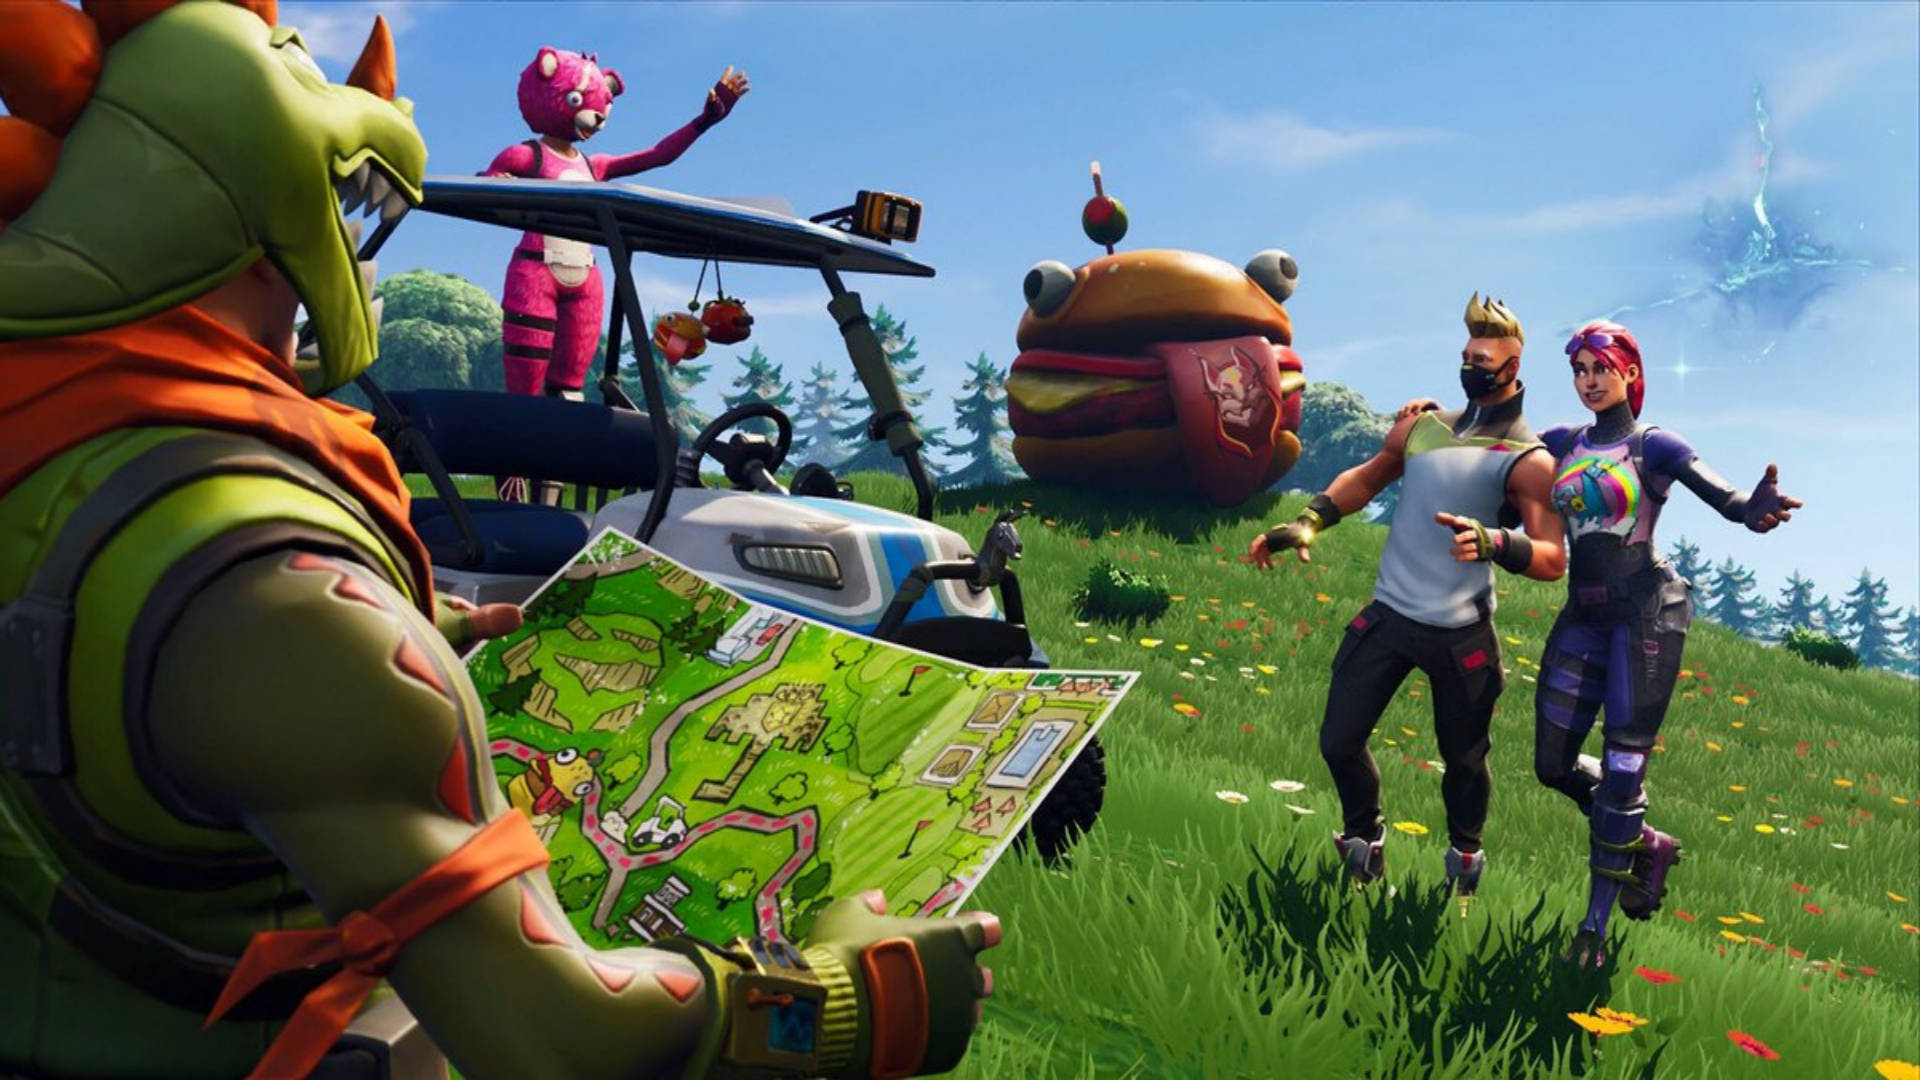 Fortnite Battle Royale Characters On A Grassy Field Background